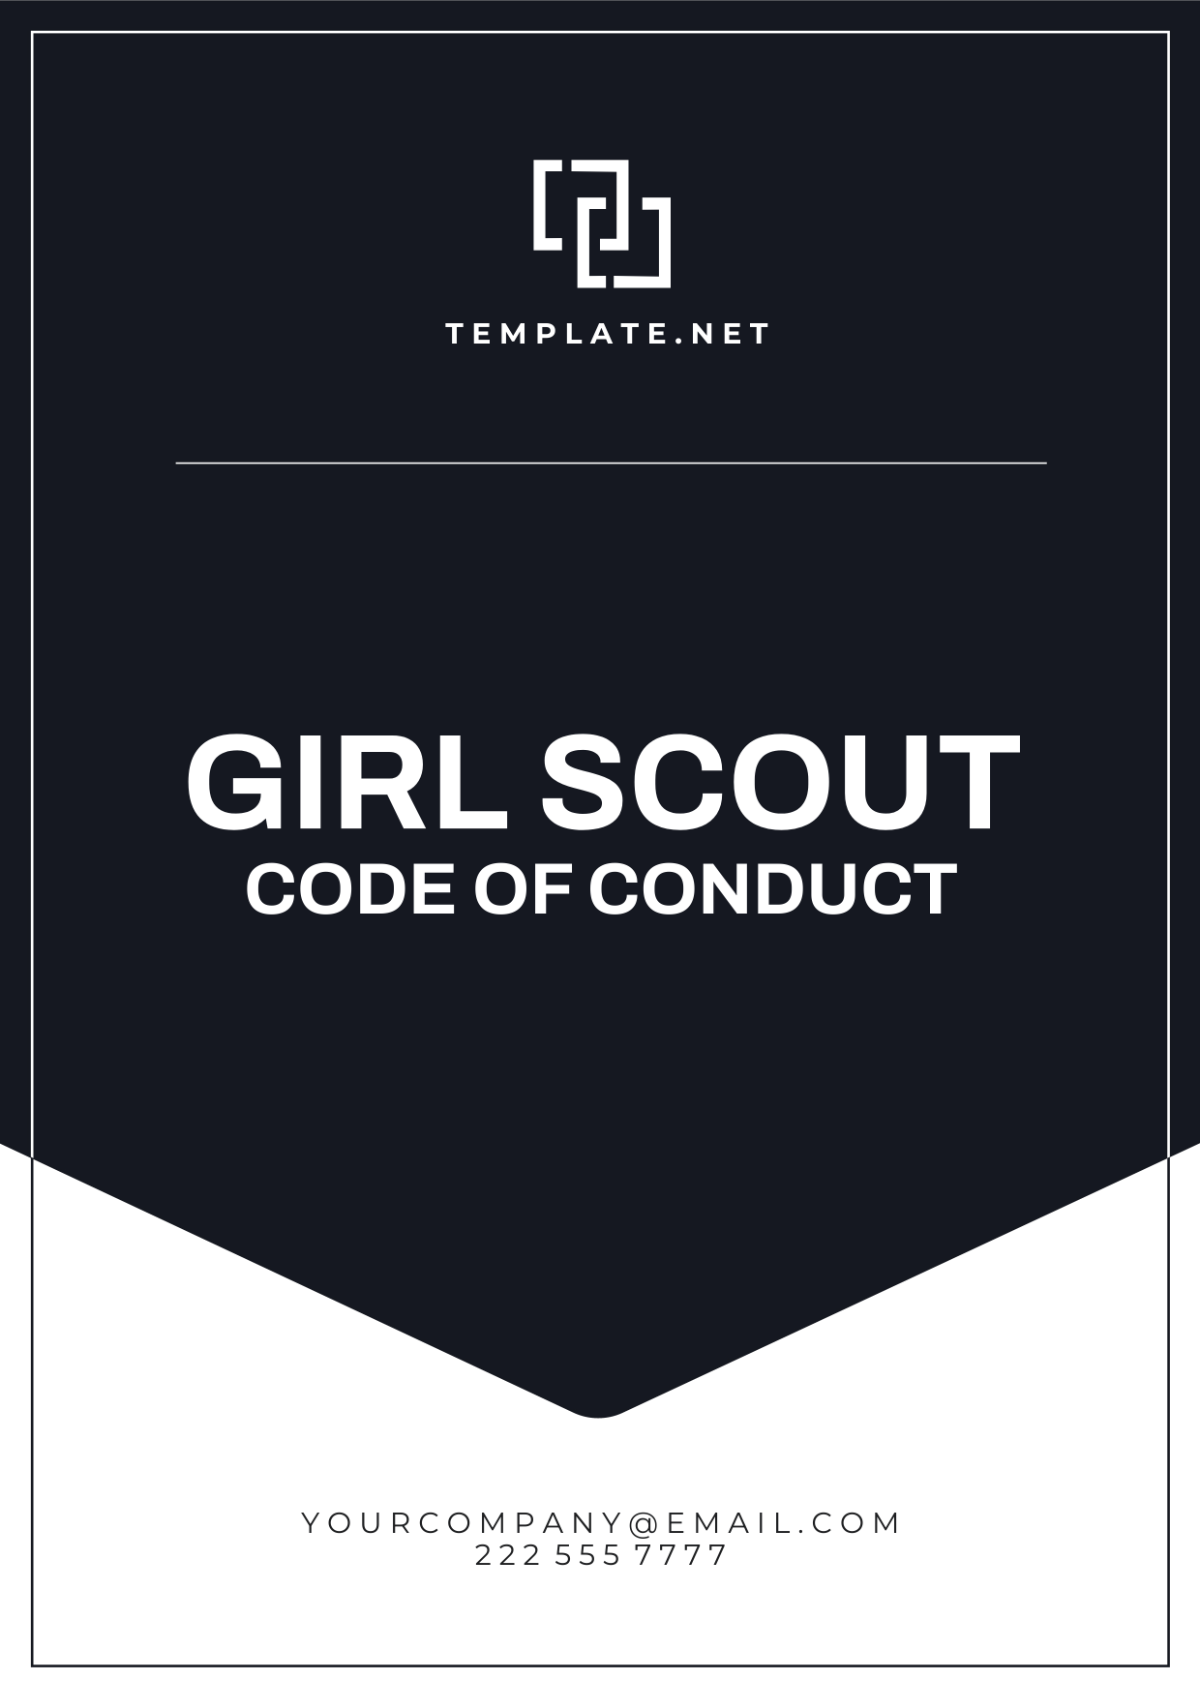 Girl Scout Code of Conduct Template